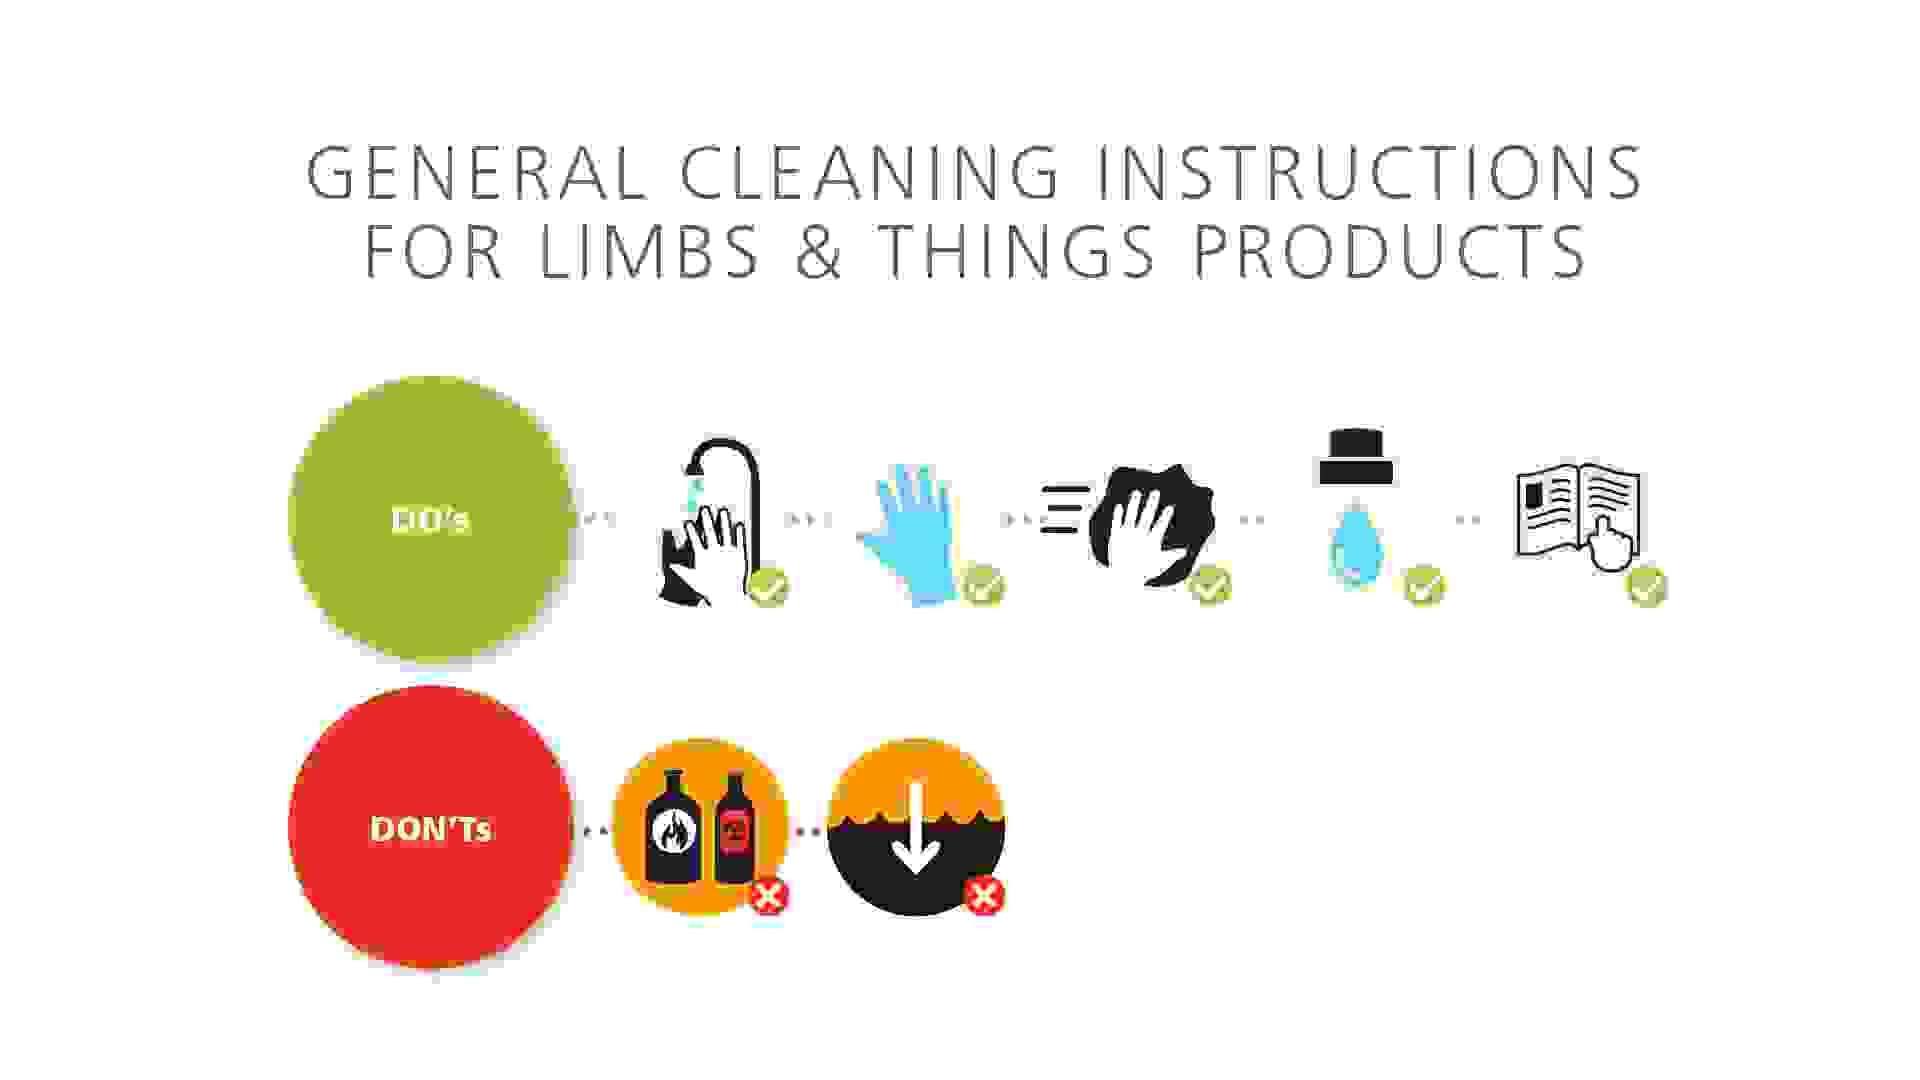 Care and cleaning of L&T products